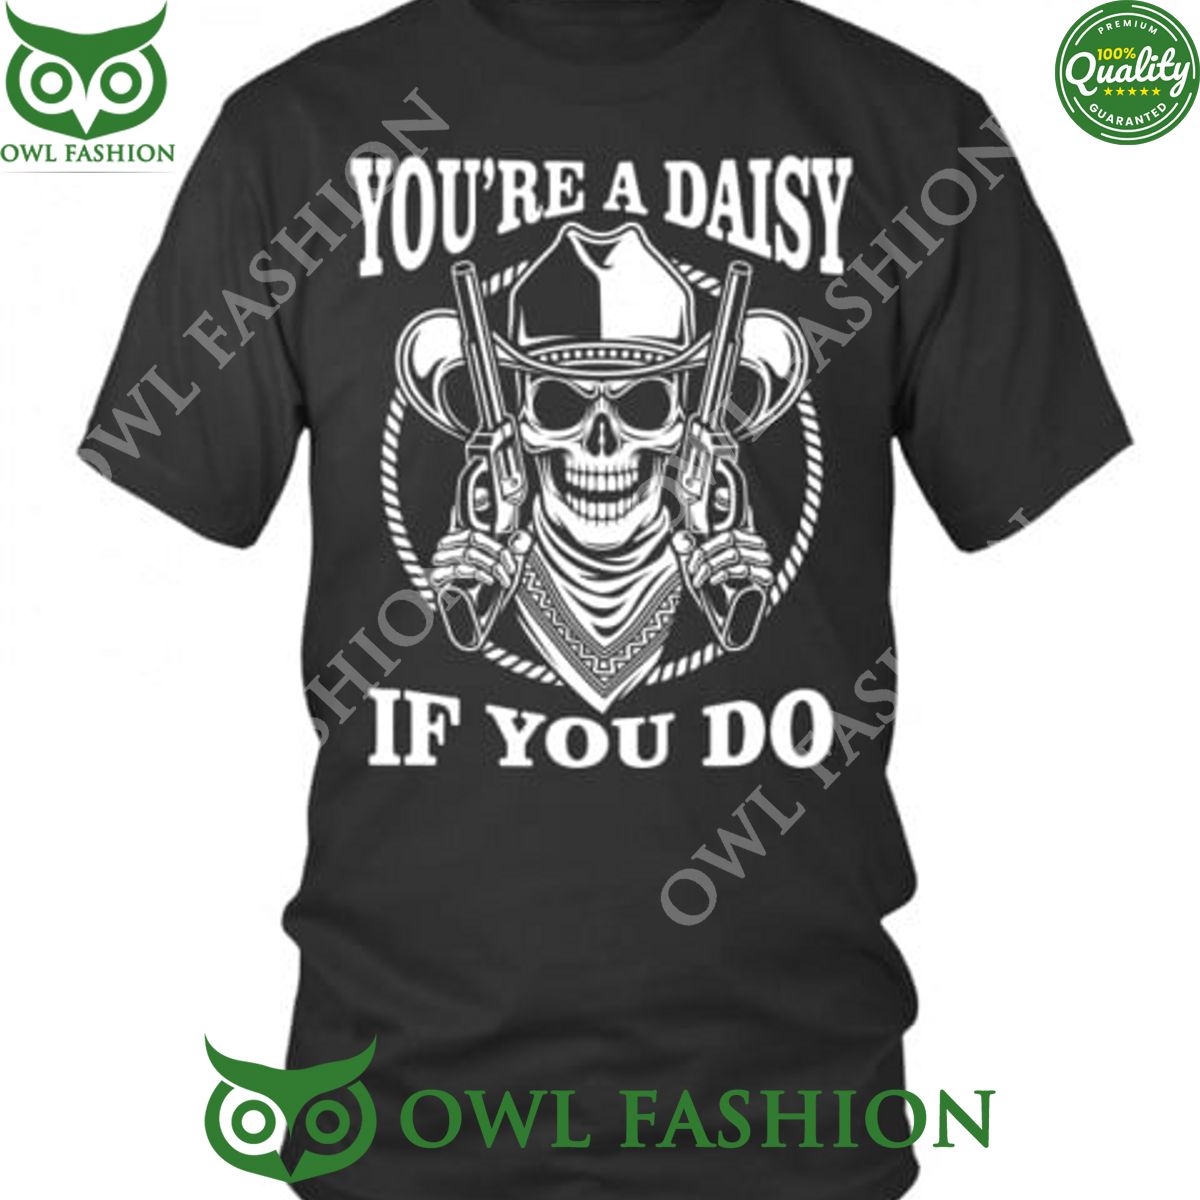 tombston 1993 you are a daisy if you do cowboys 2d t shirt 1 3ccog.jpg